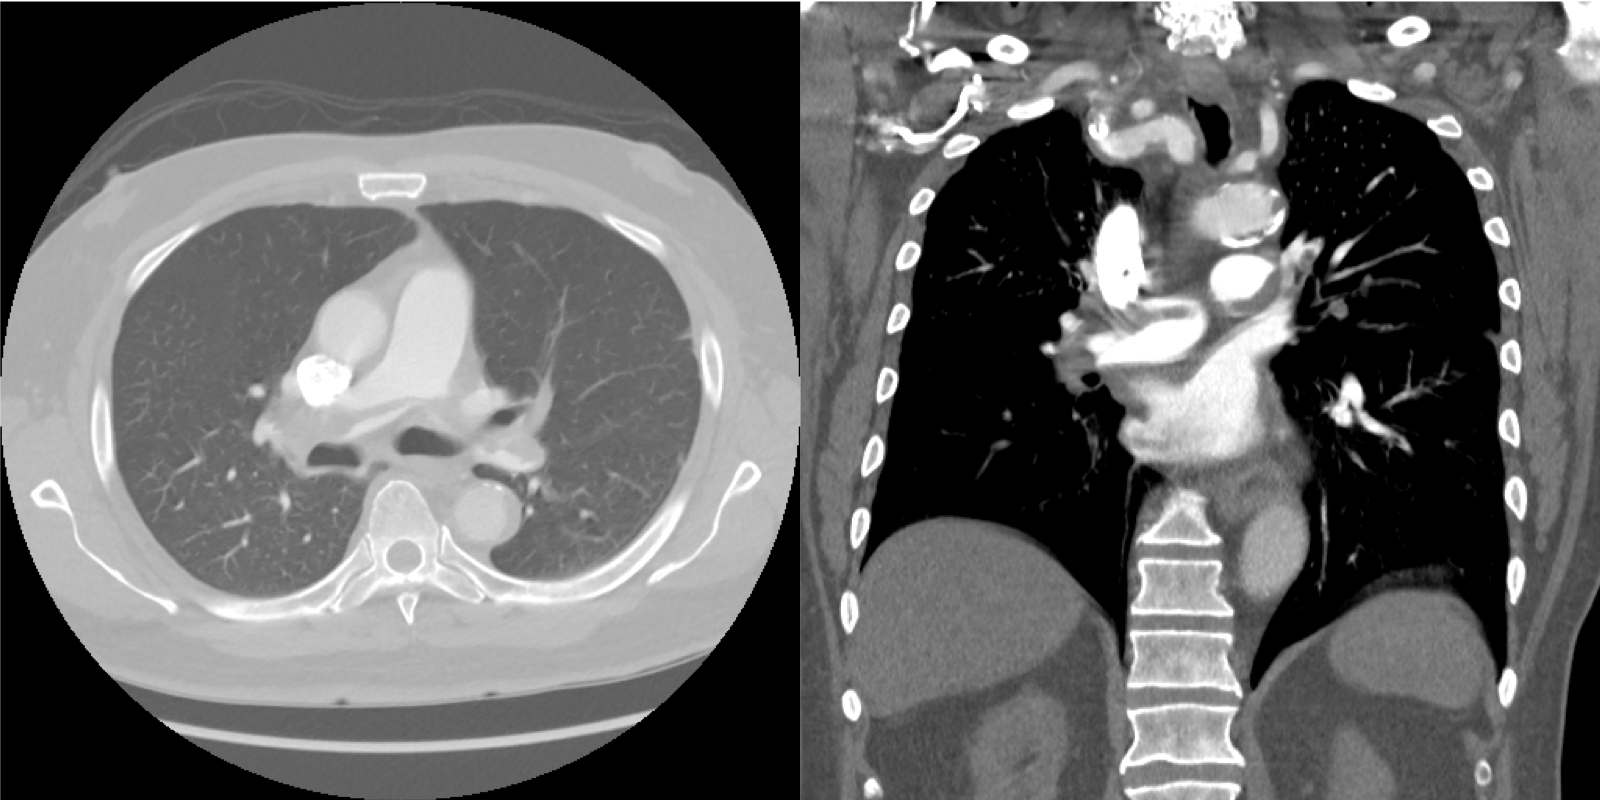 Axial and coronal views of a CT PE study demonstrating a saddle pulmonary embolus seen as a filling defect in the main pulmonary artery with extension into the right and left pulmonary arteries